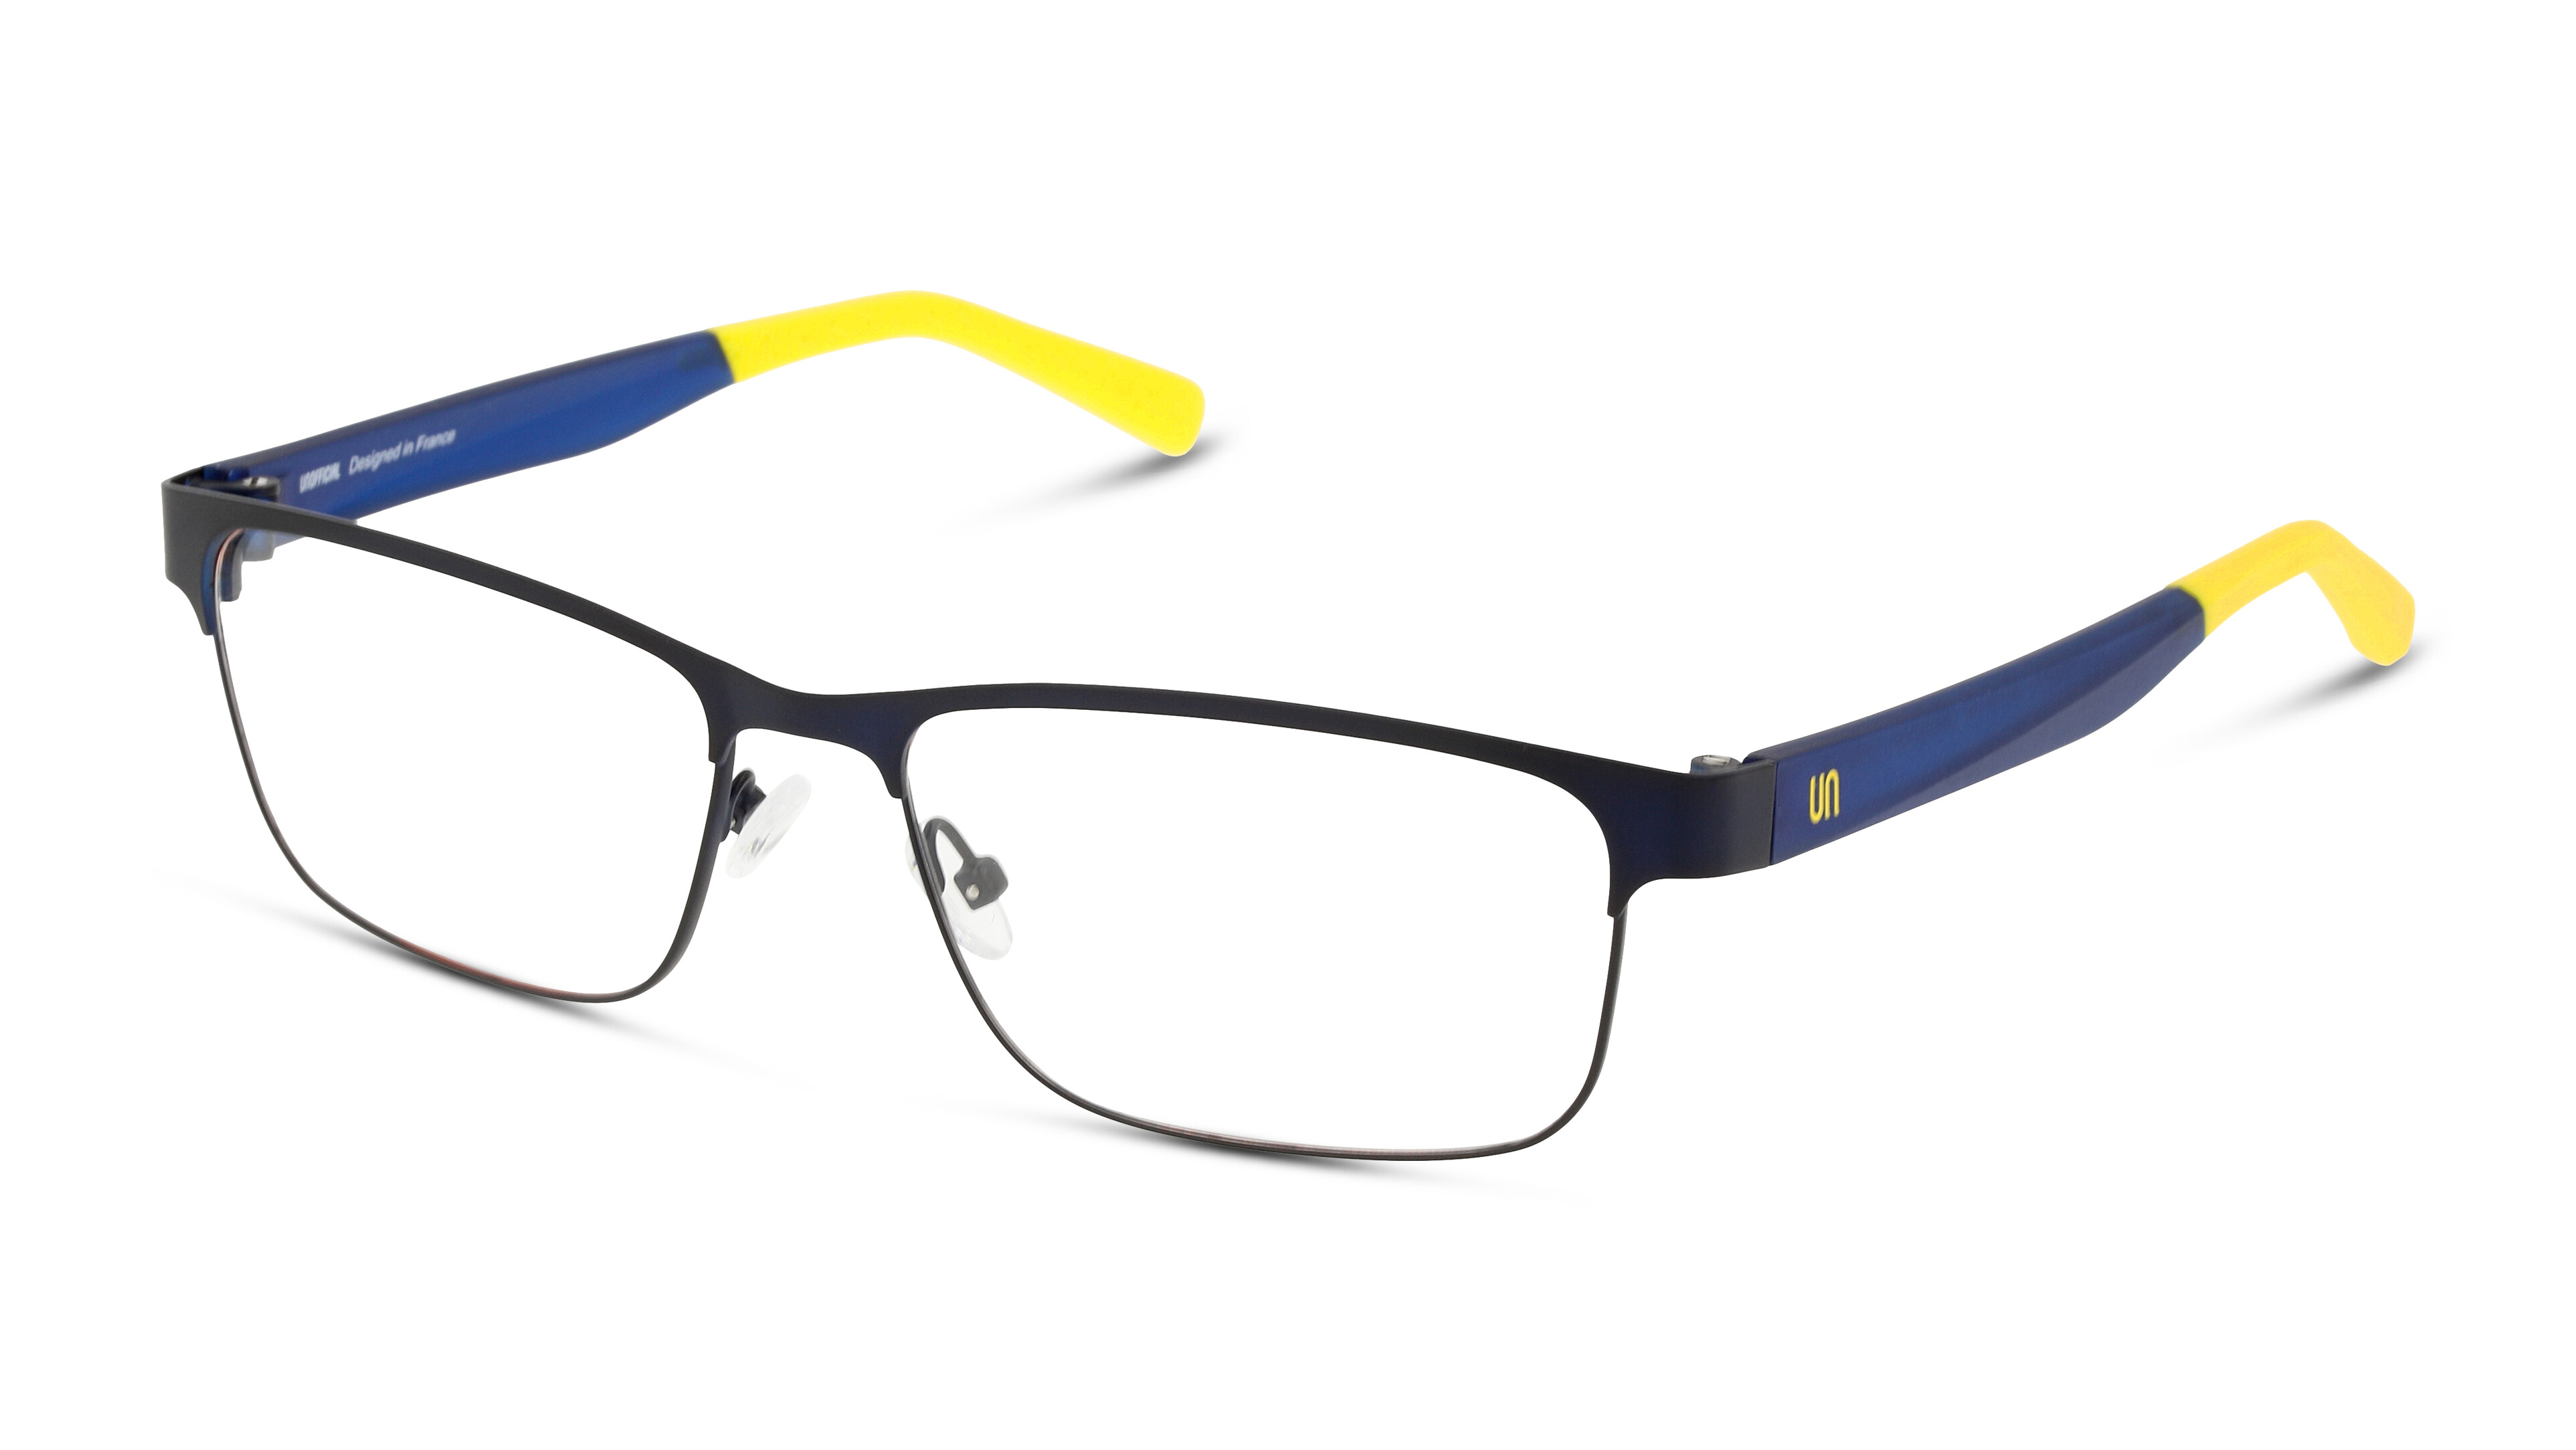 Angle_Left01 UNOFFICIAL UNOM0199 CY00 Brille Blau